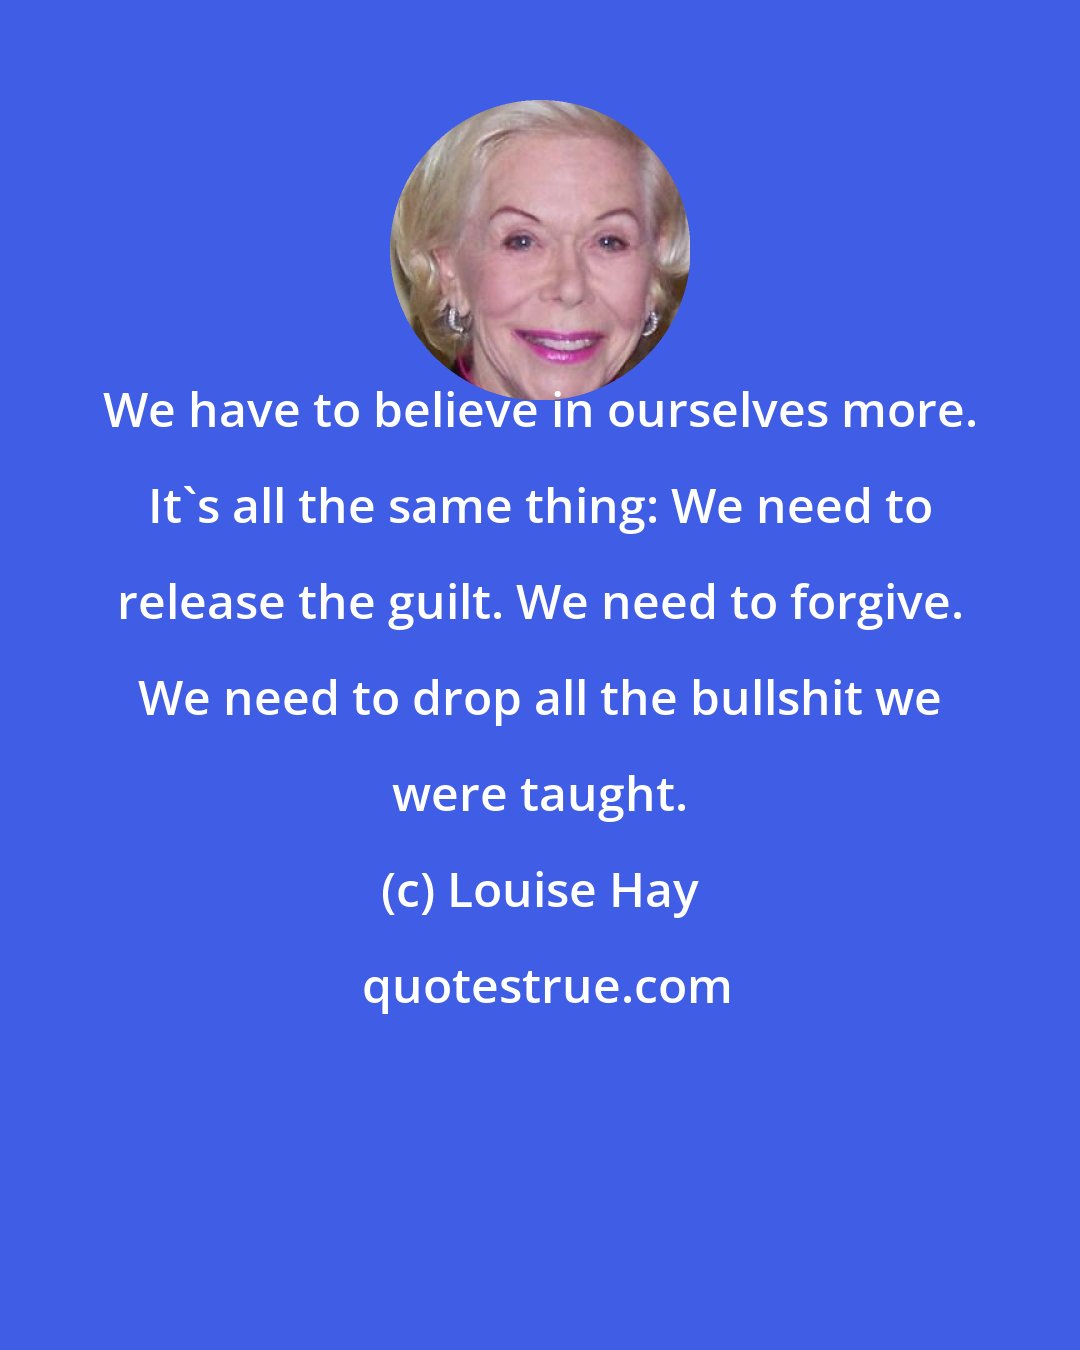 Louise Hay: We have to believe in ourselves more. It's all the same thing: We need to release the guilt. We need to forgive. We need to drop all the bullshit we were taught.